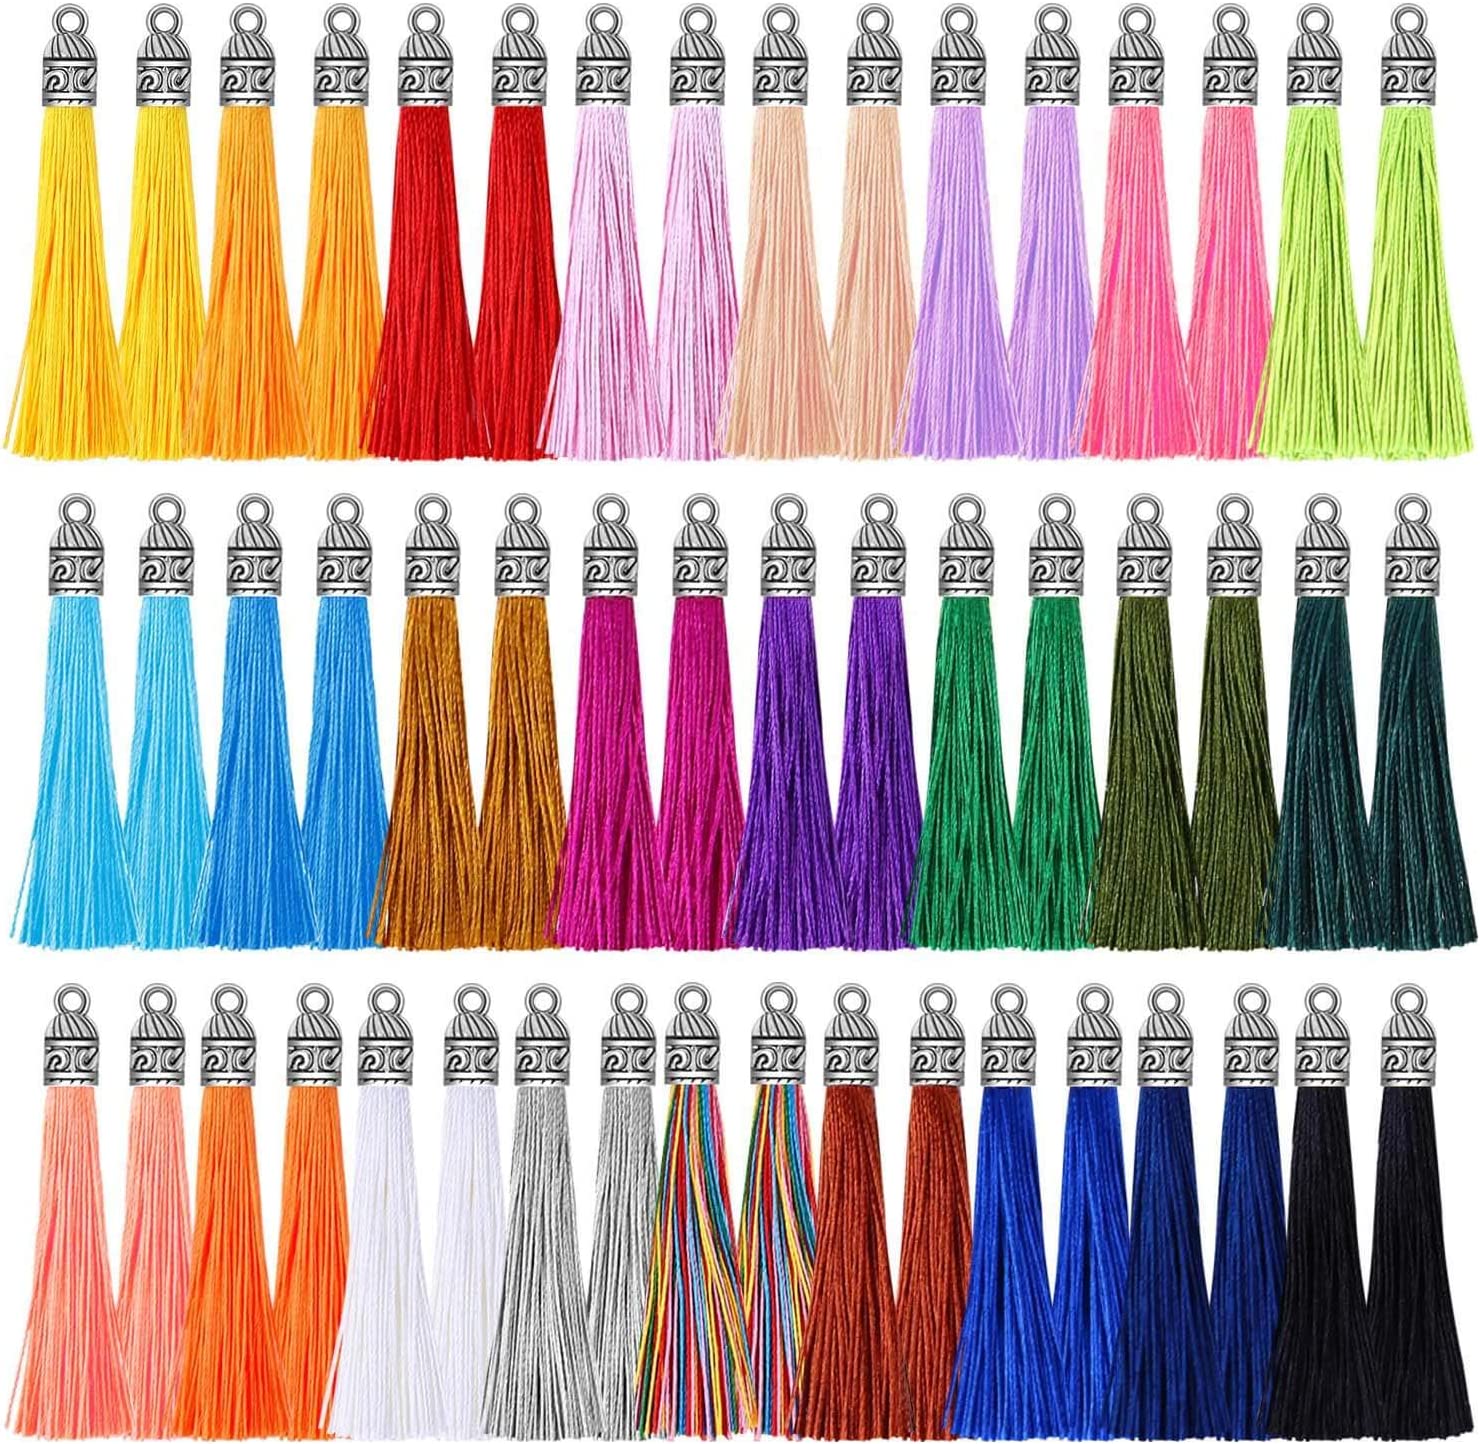  KONMAY 10PCS 8.5cm(3.4'') Craft Tassels with Hollowed